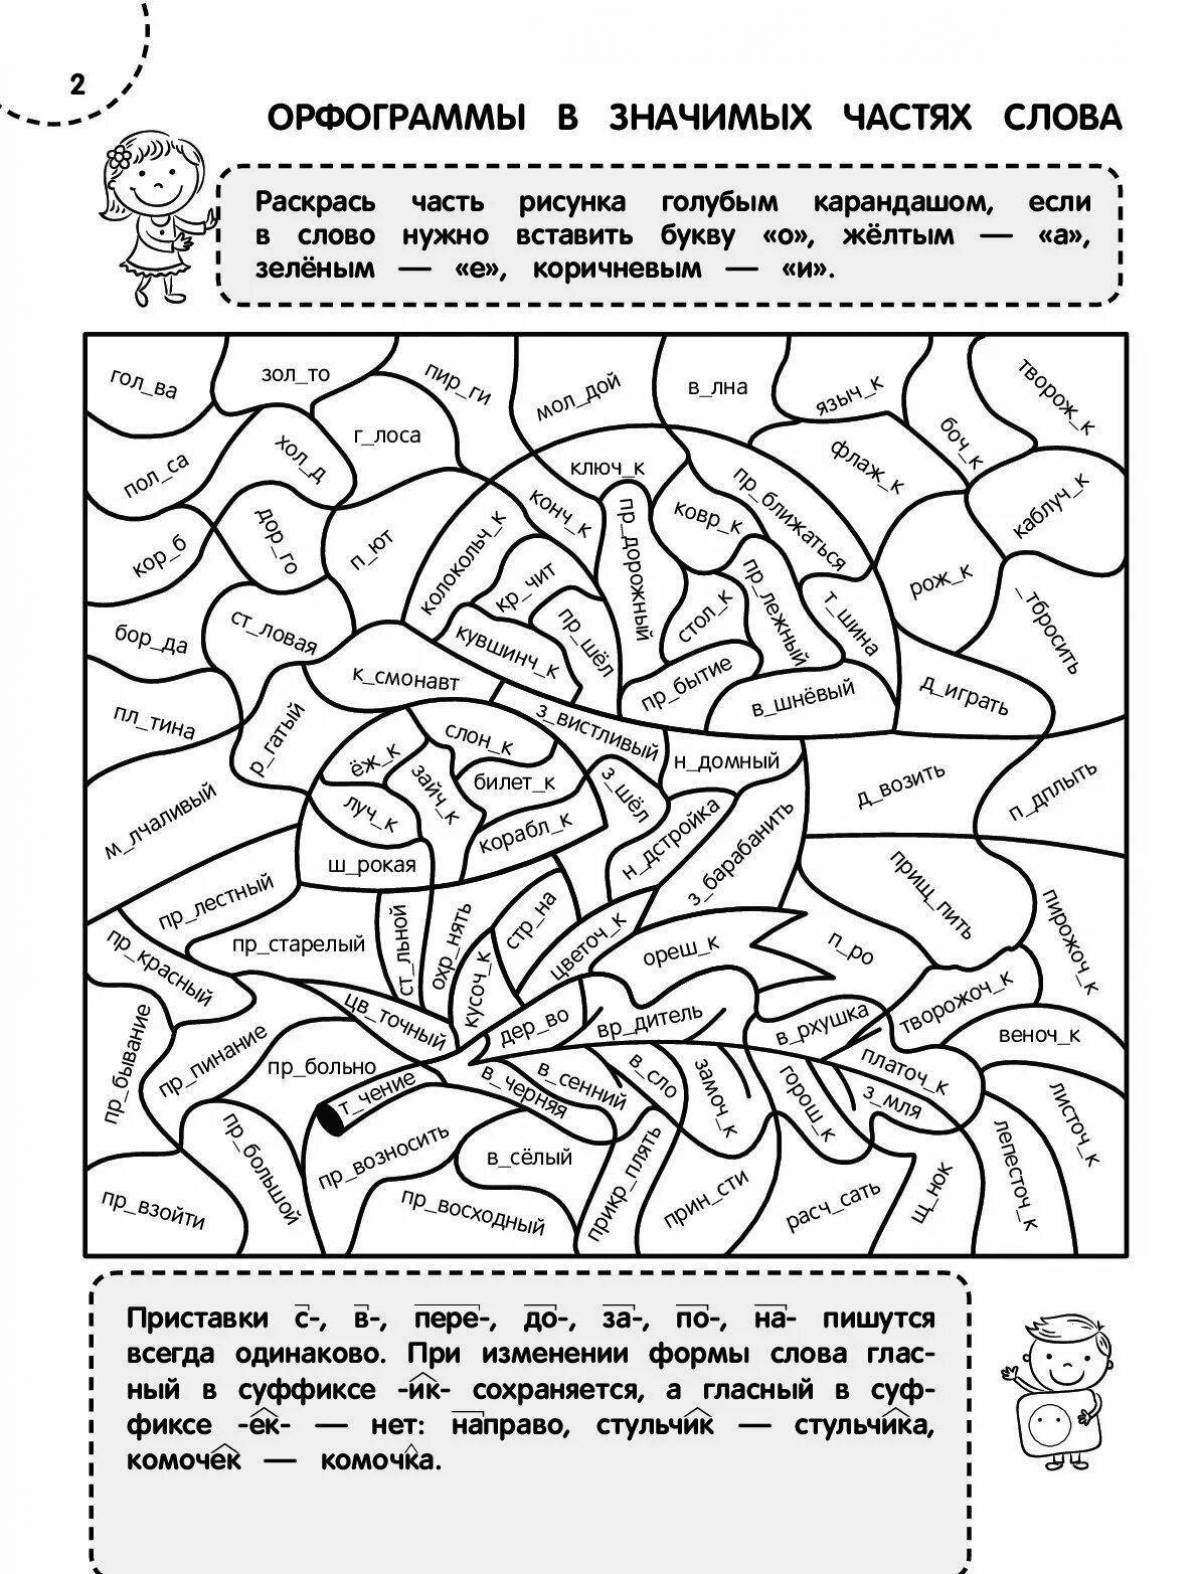 Charming coloring book task 3 for 6th grade